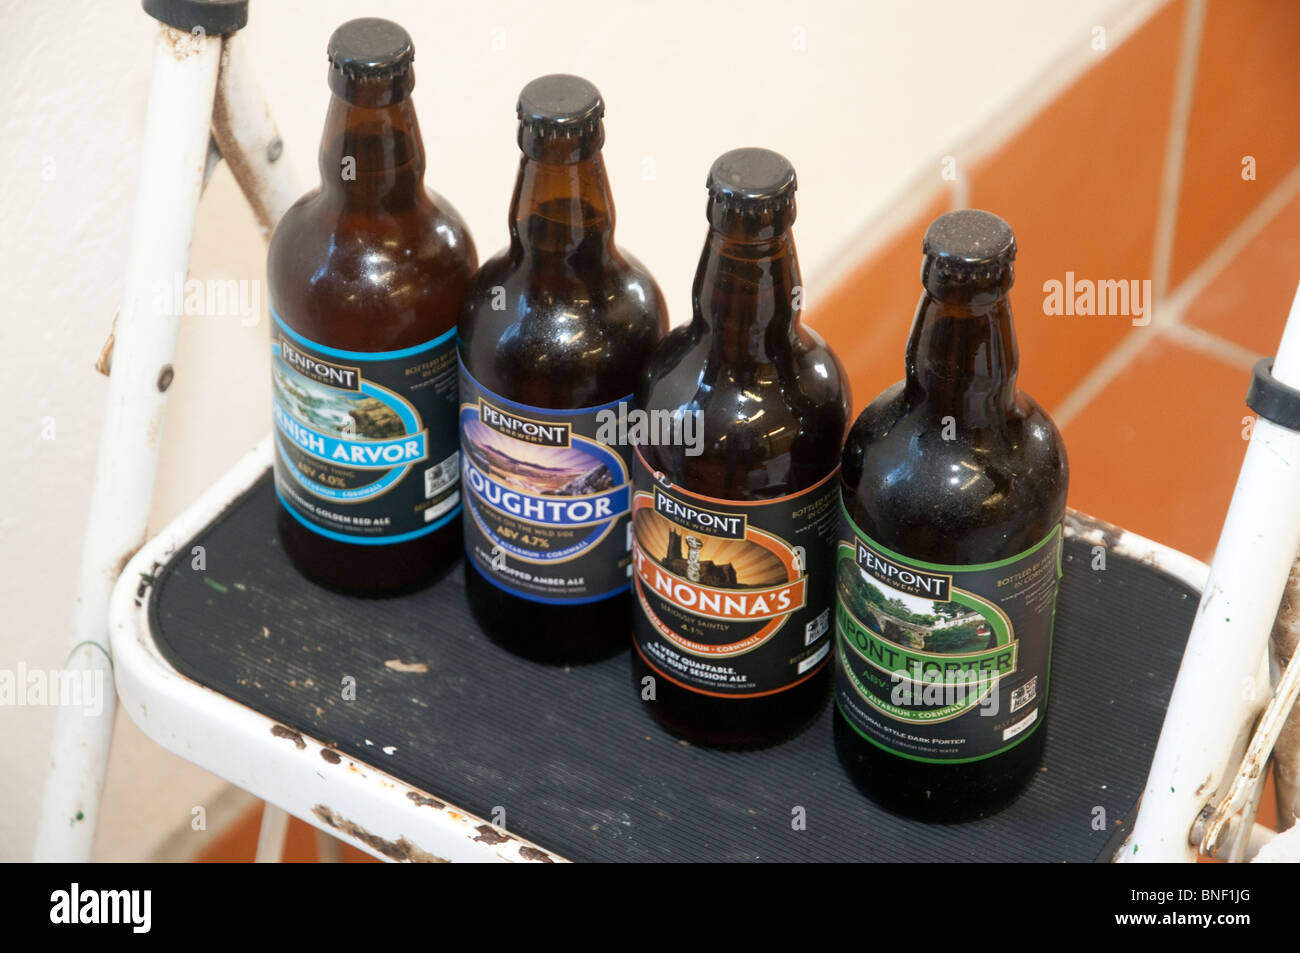 Range of bottled beers from Penpont brewery, Cornwall, displayed on a white step-ladder in the brewery Stock Photo